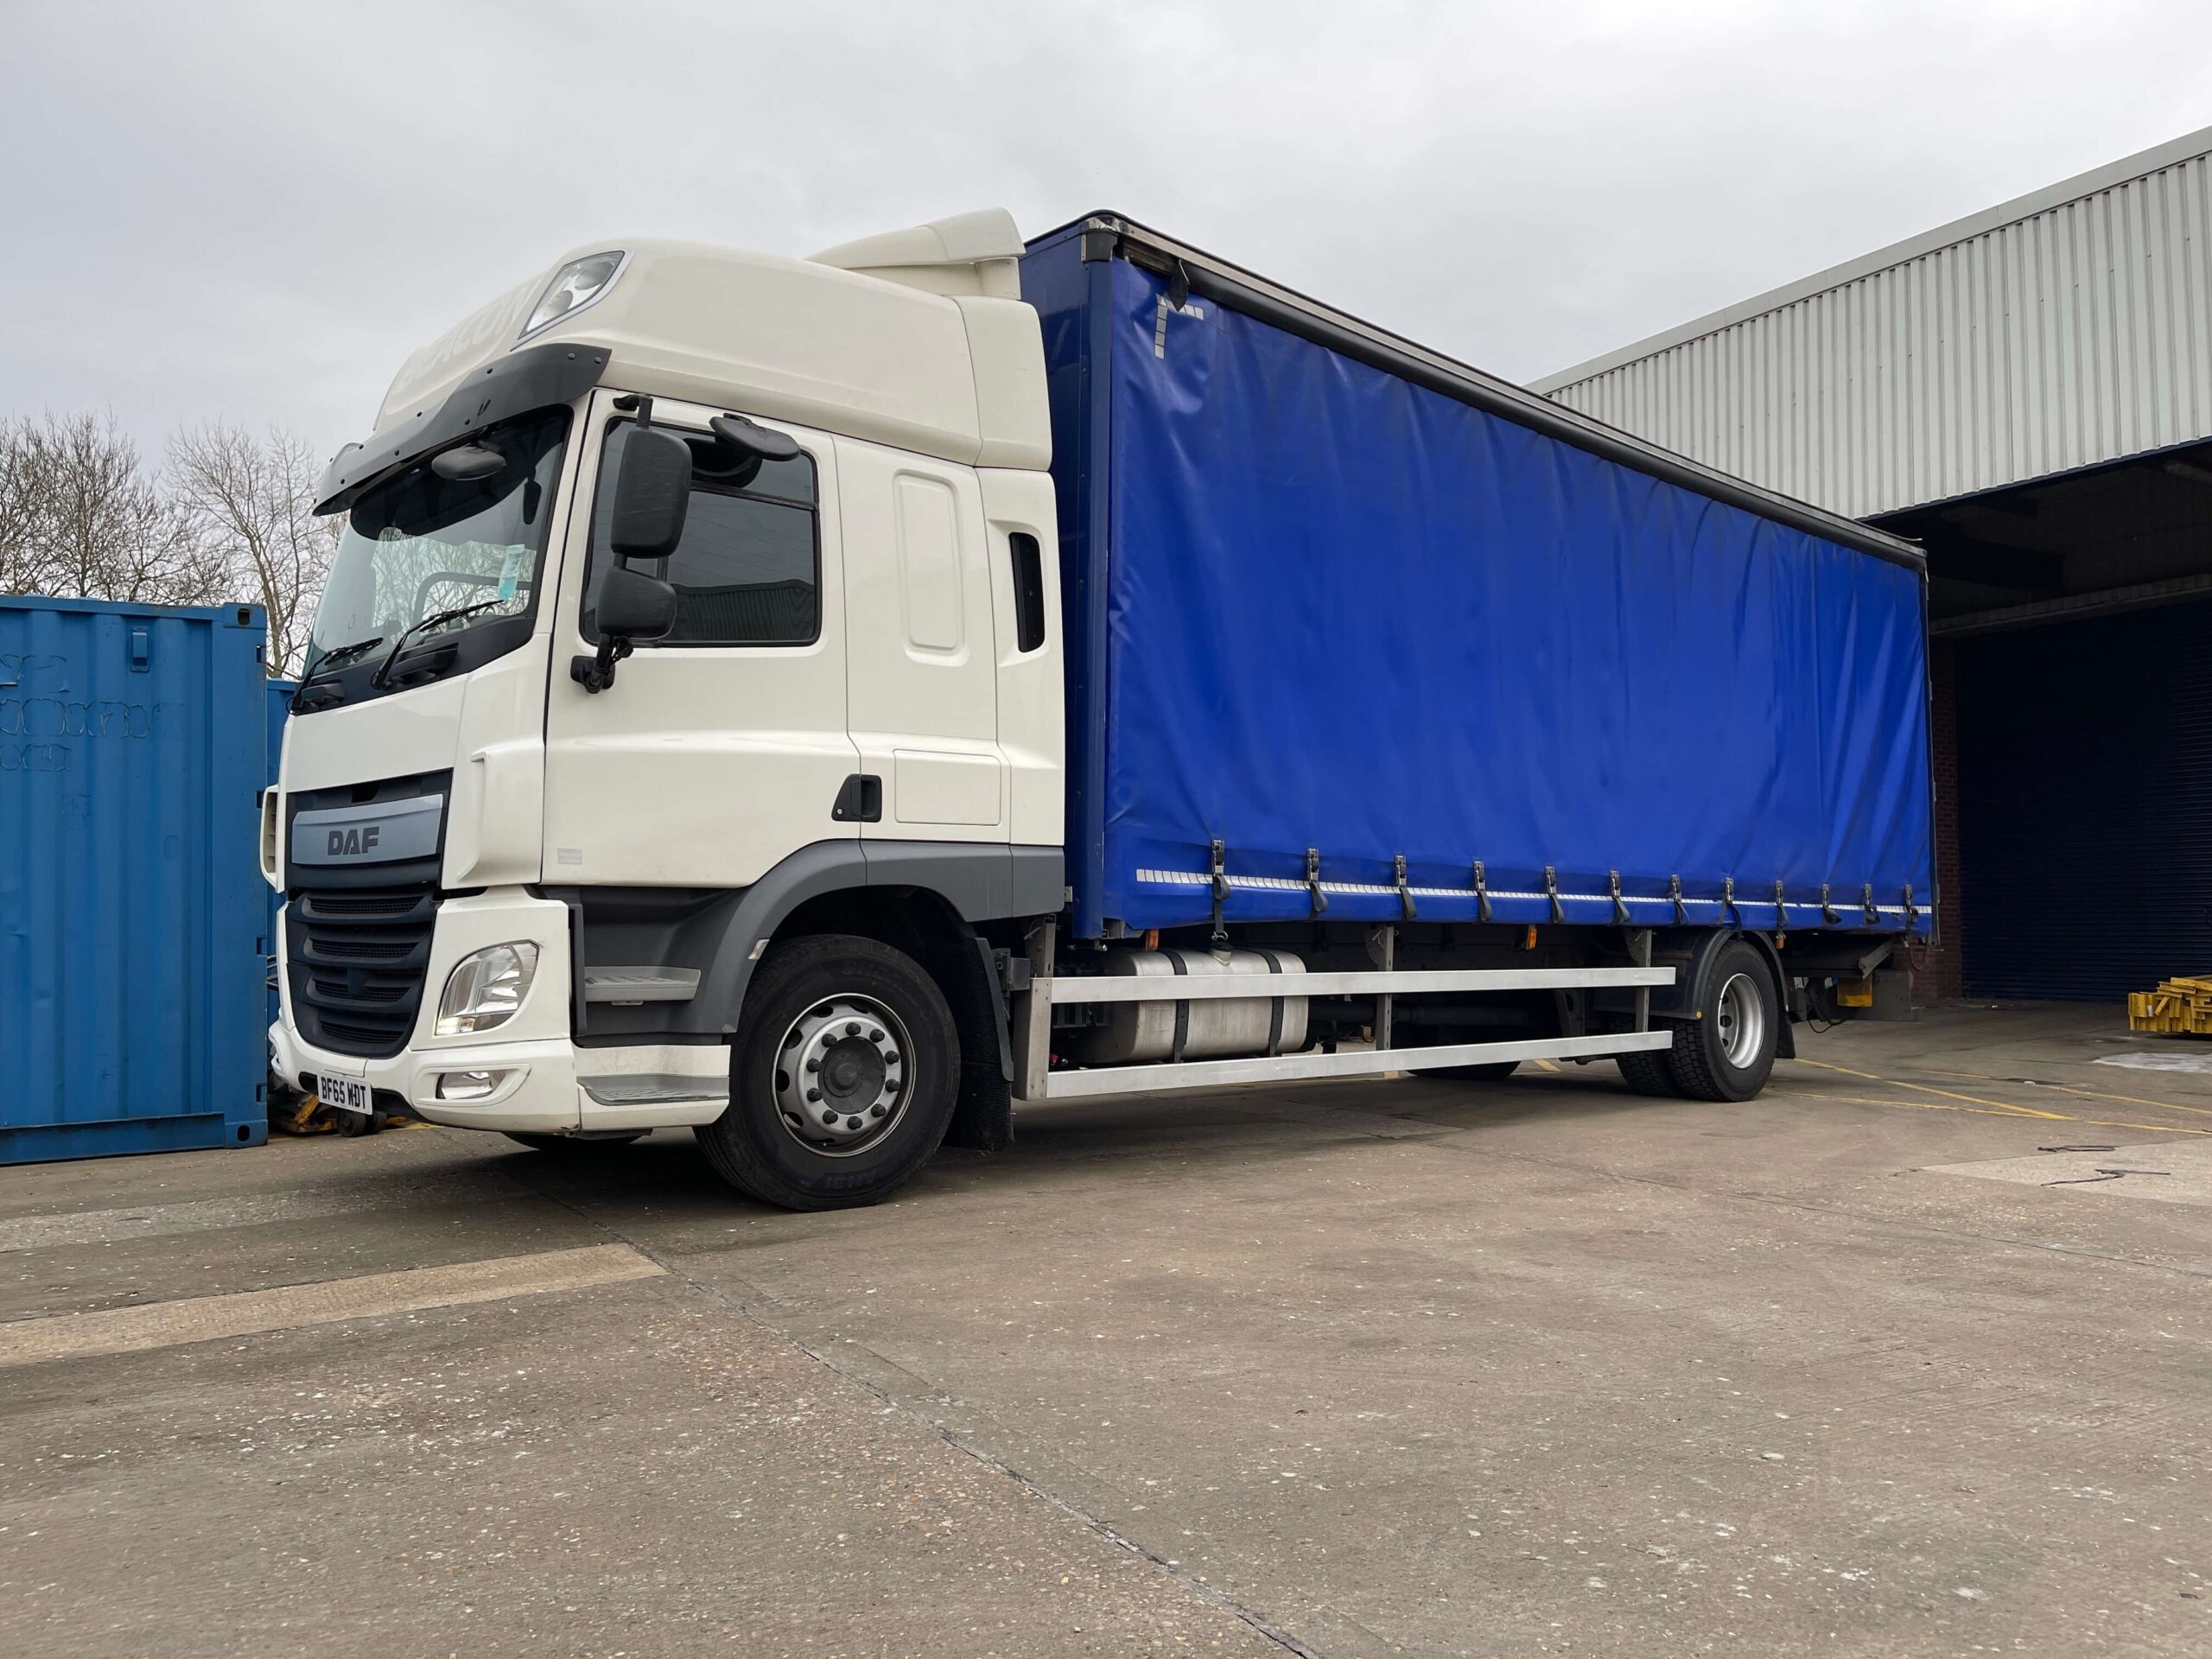 18 ton blue curtainsider tail lifted lorry